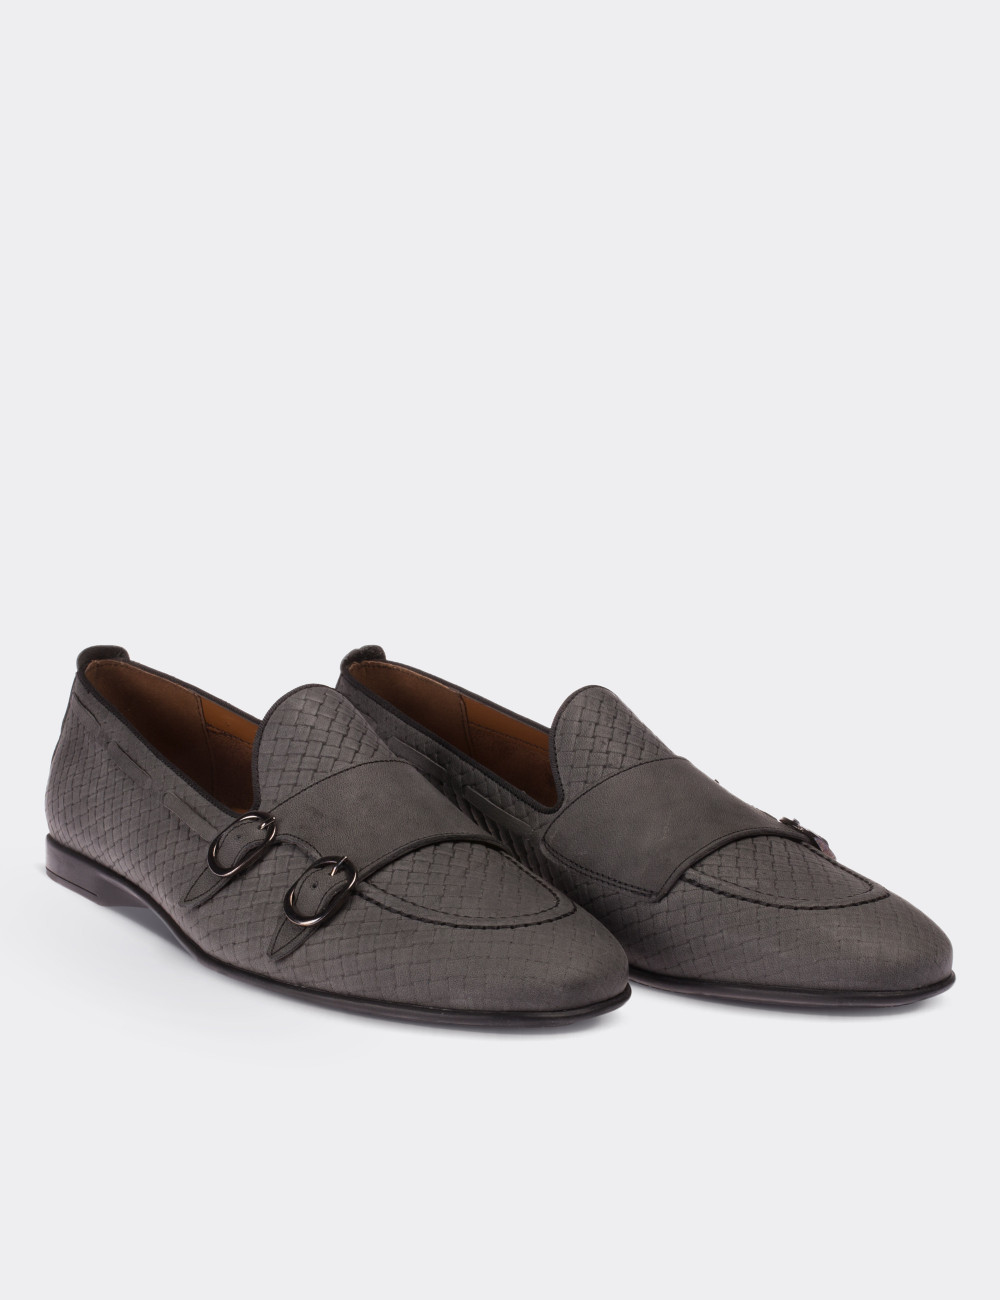 Gray Nubuck Leather Loafers - 01645MGRIC01